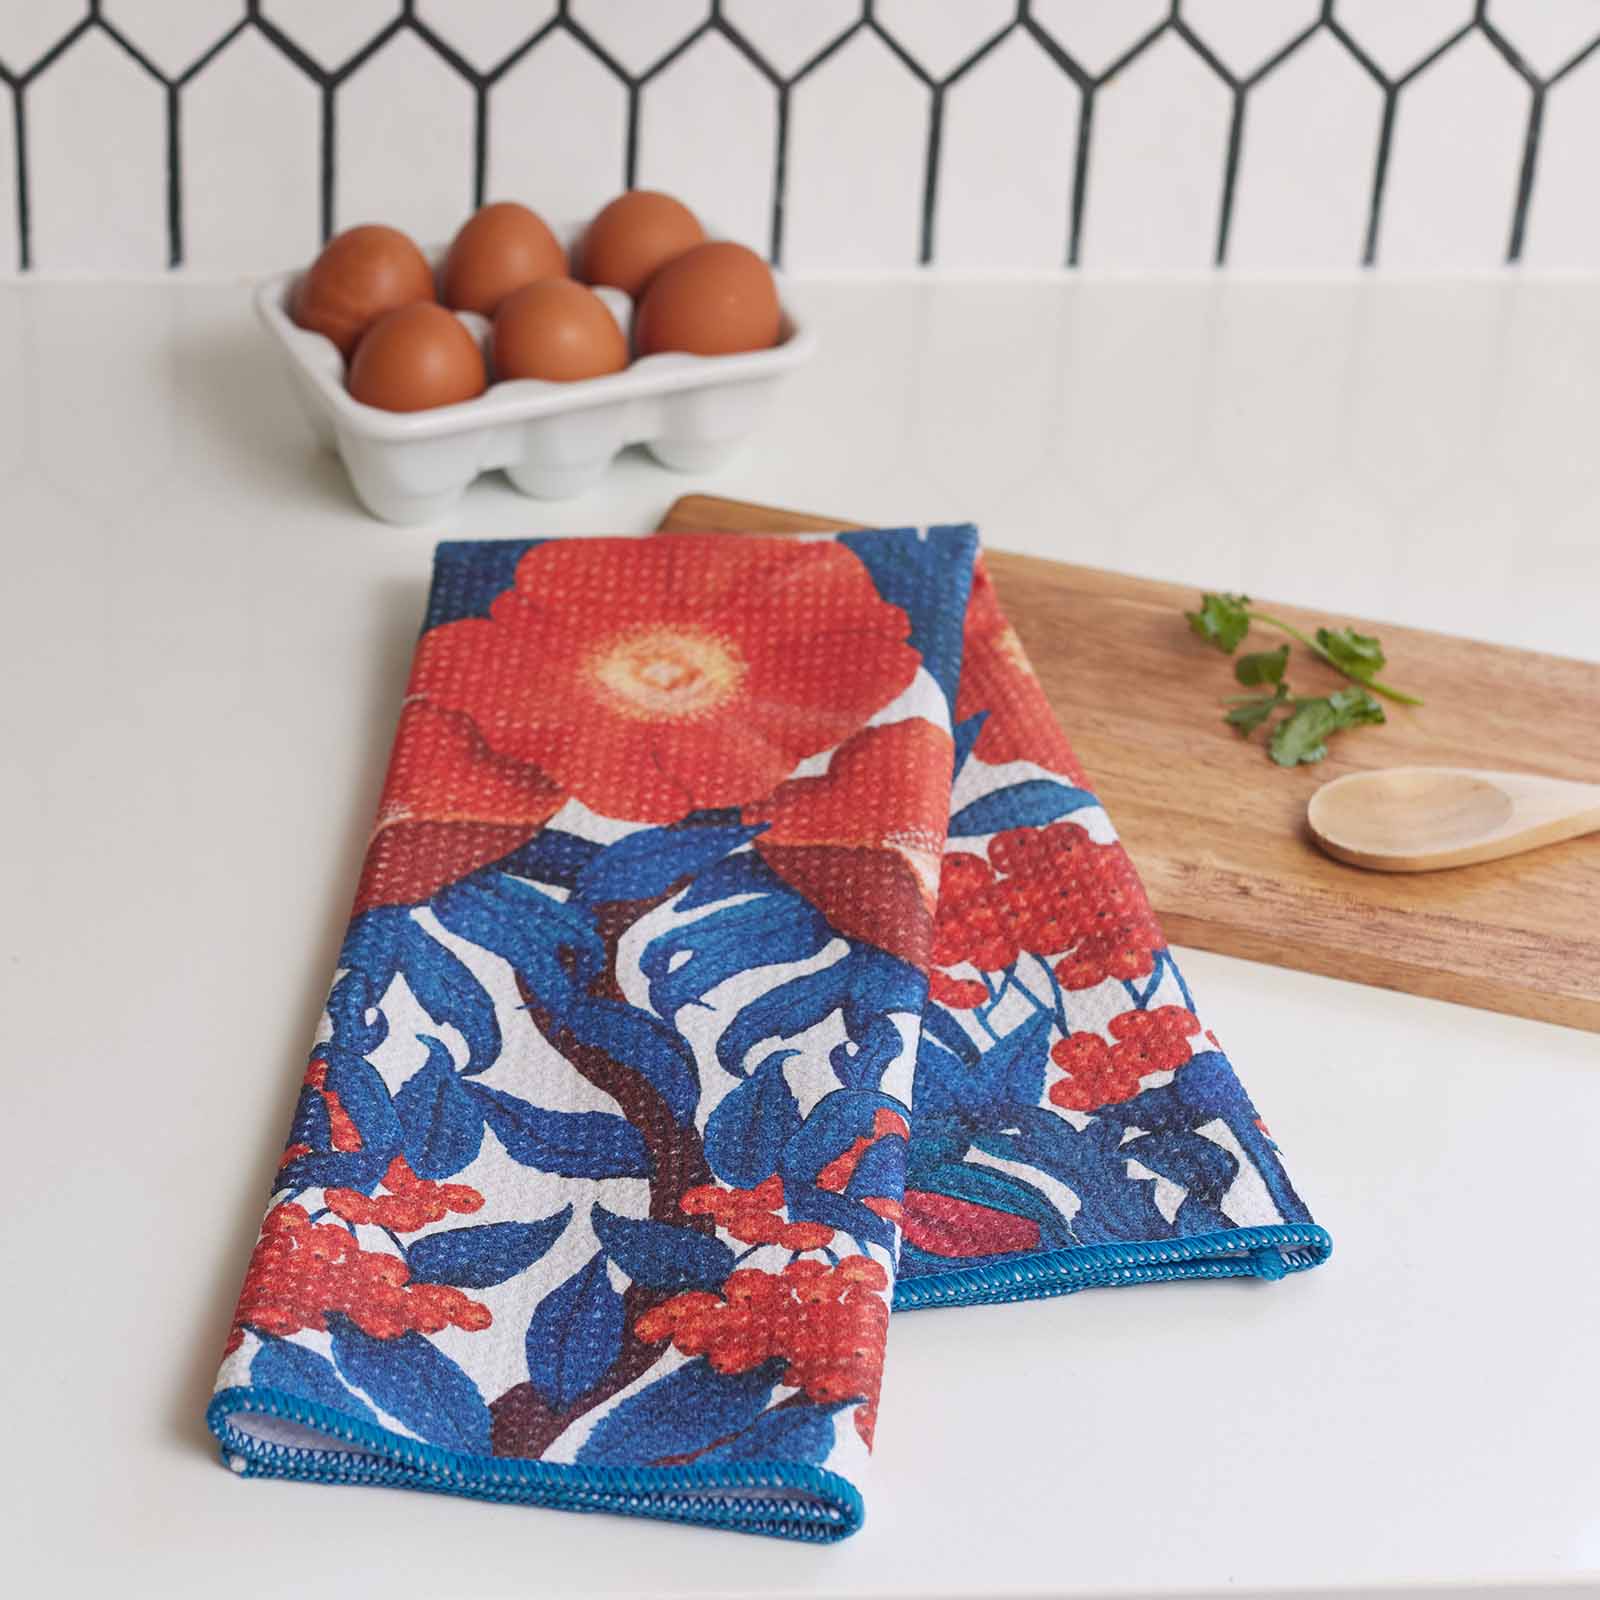  Giwawa Spring Poppy Hanging Kitchen Towels with Loop